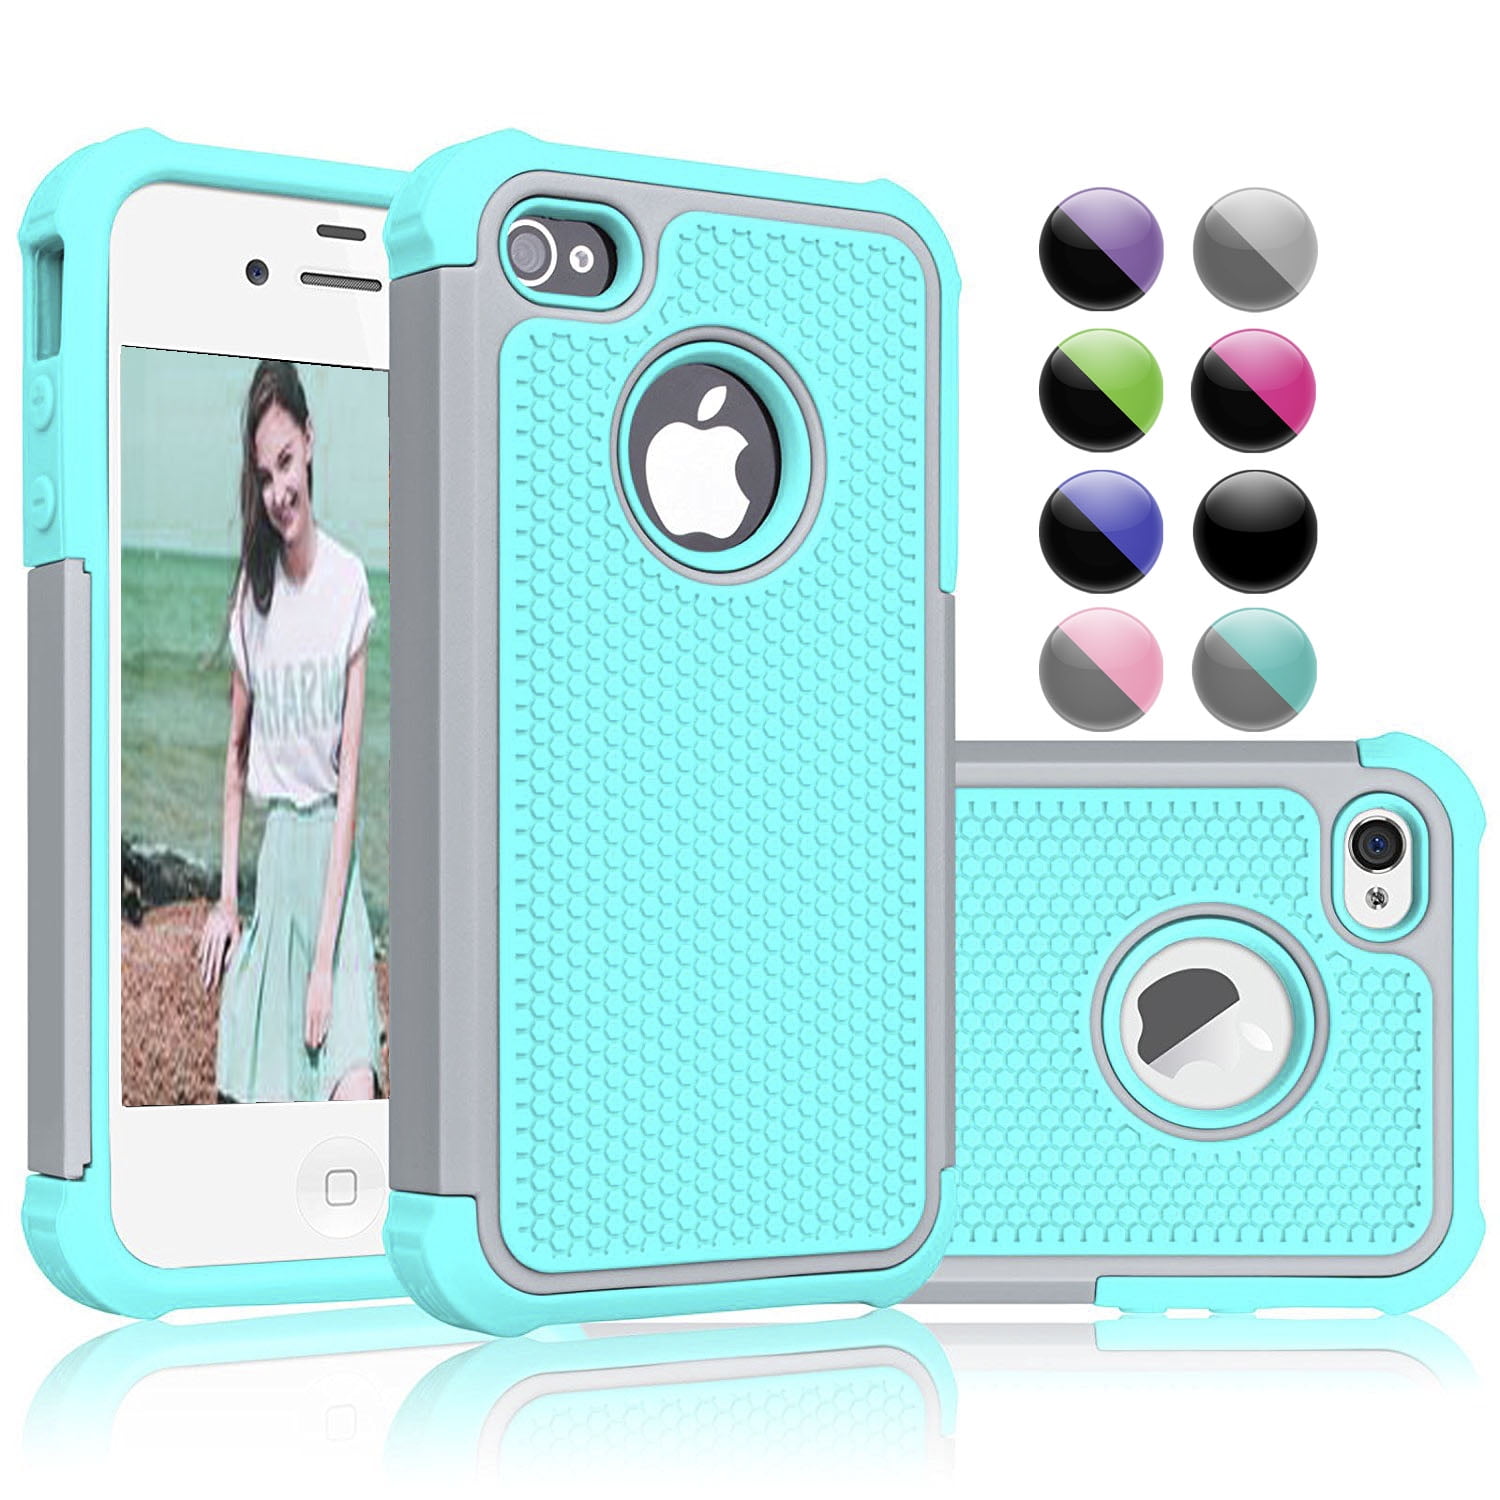 with Air Cushion Hybrid Armor Drop Protection for iPhone5 5s Case Compatible for iPhone5 5s Case 